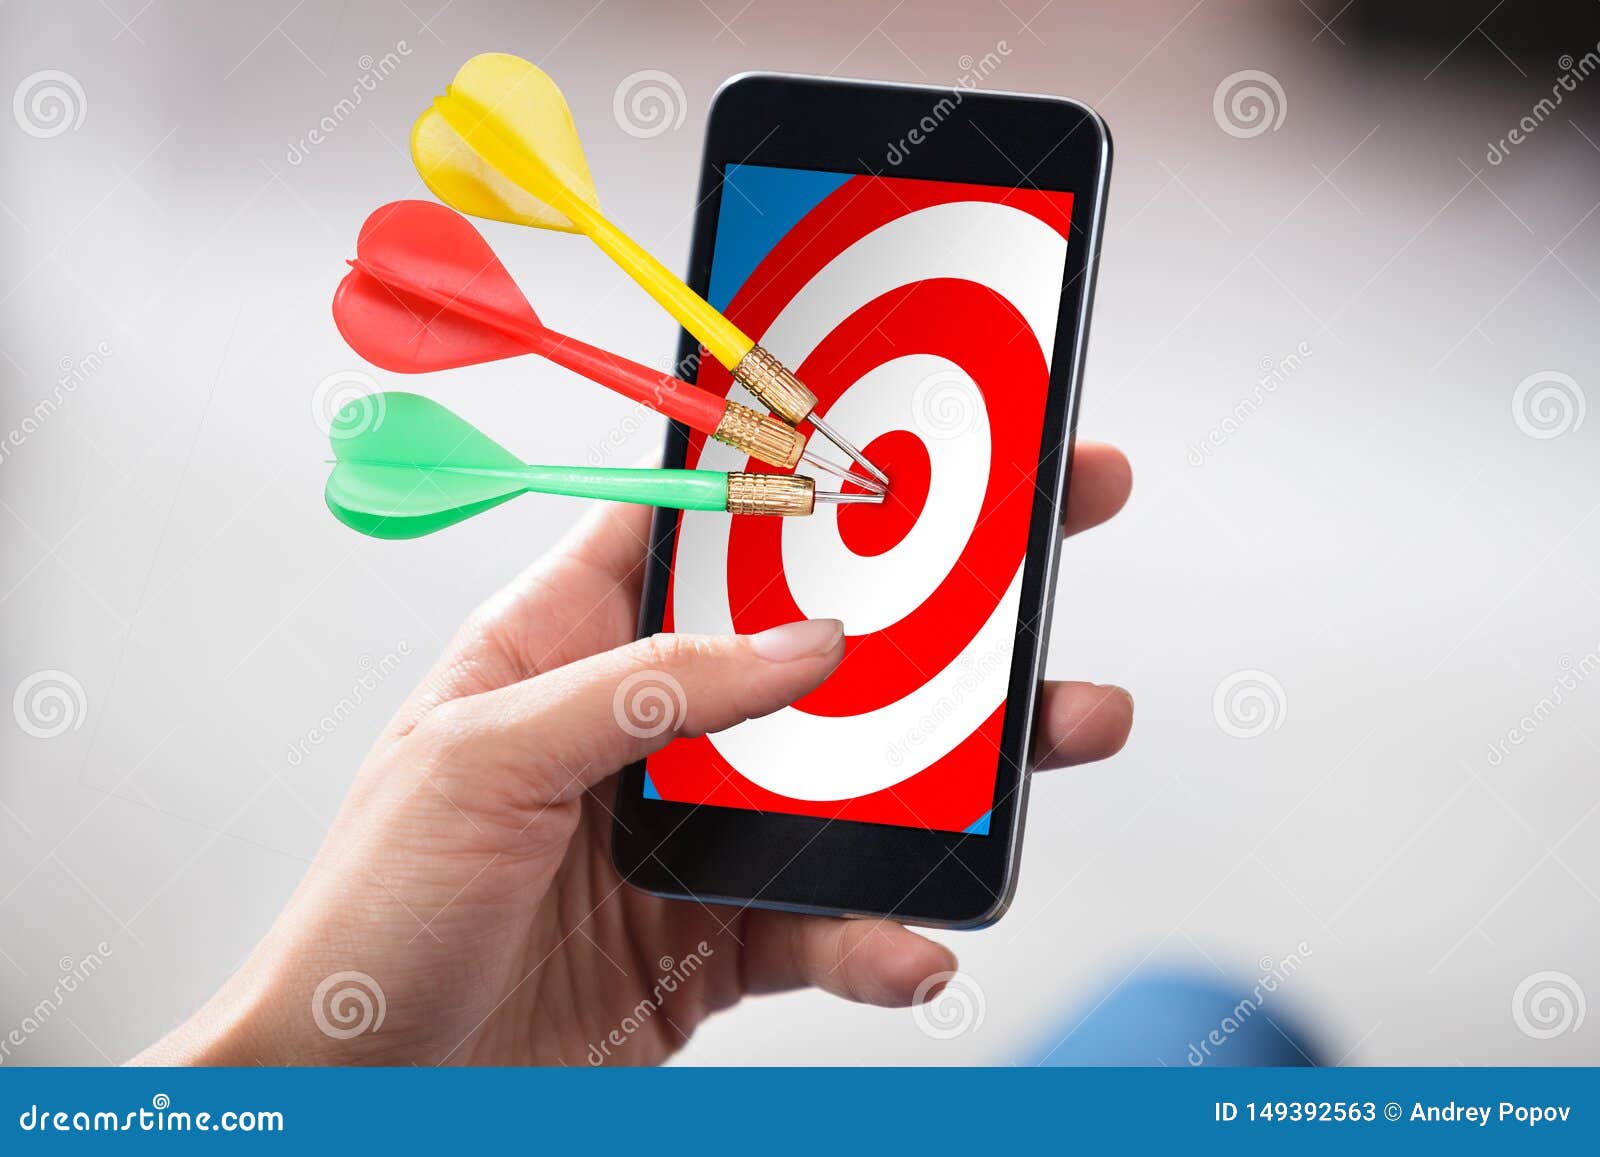 person holding cellphone with darts on target